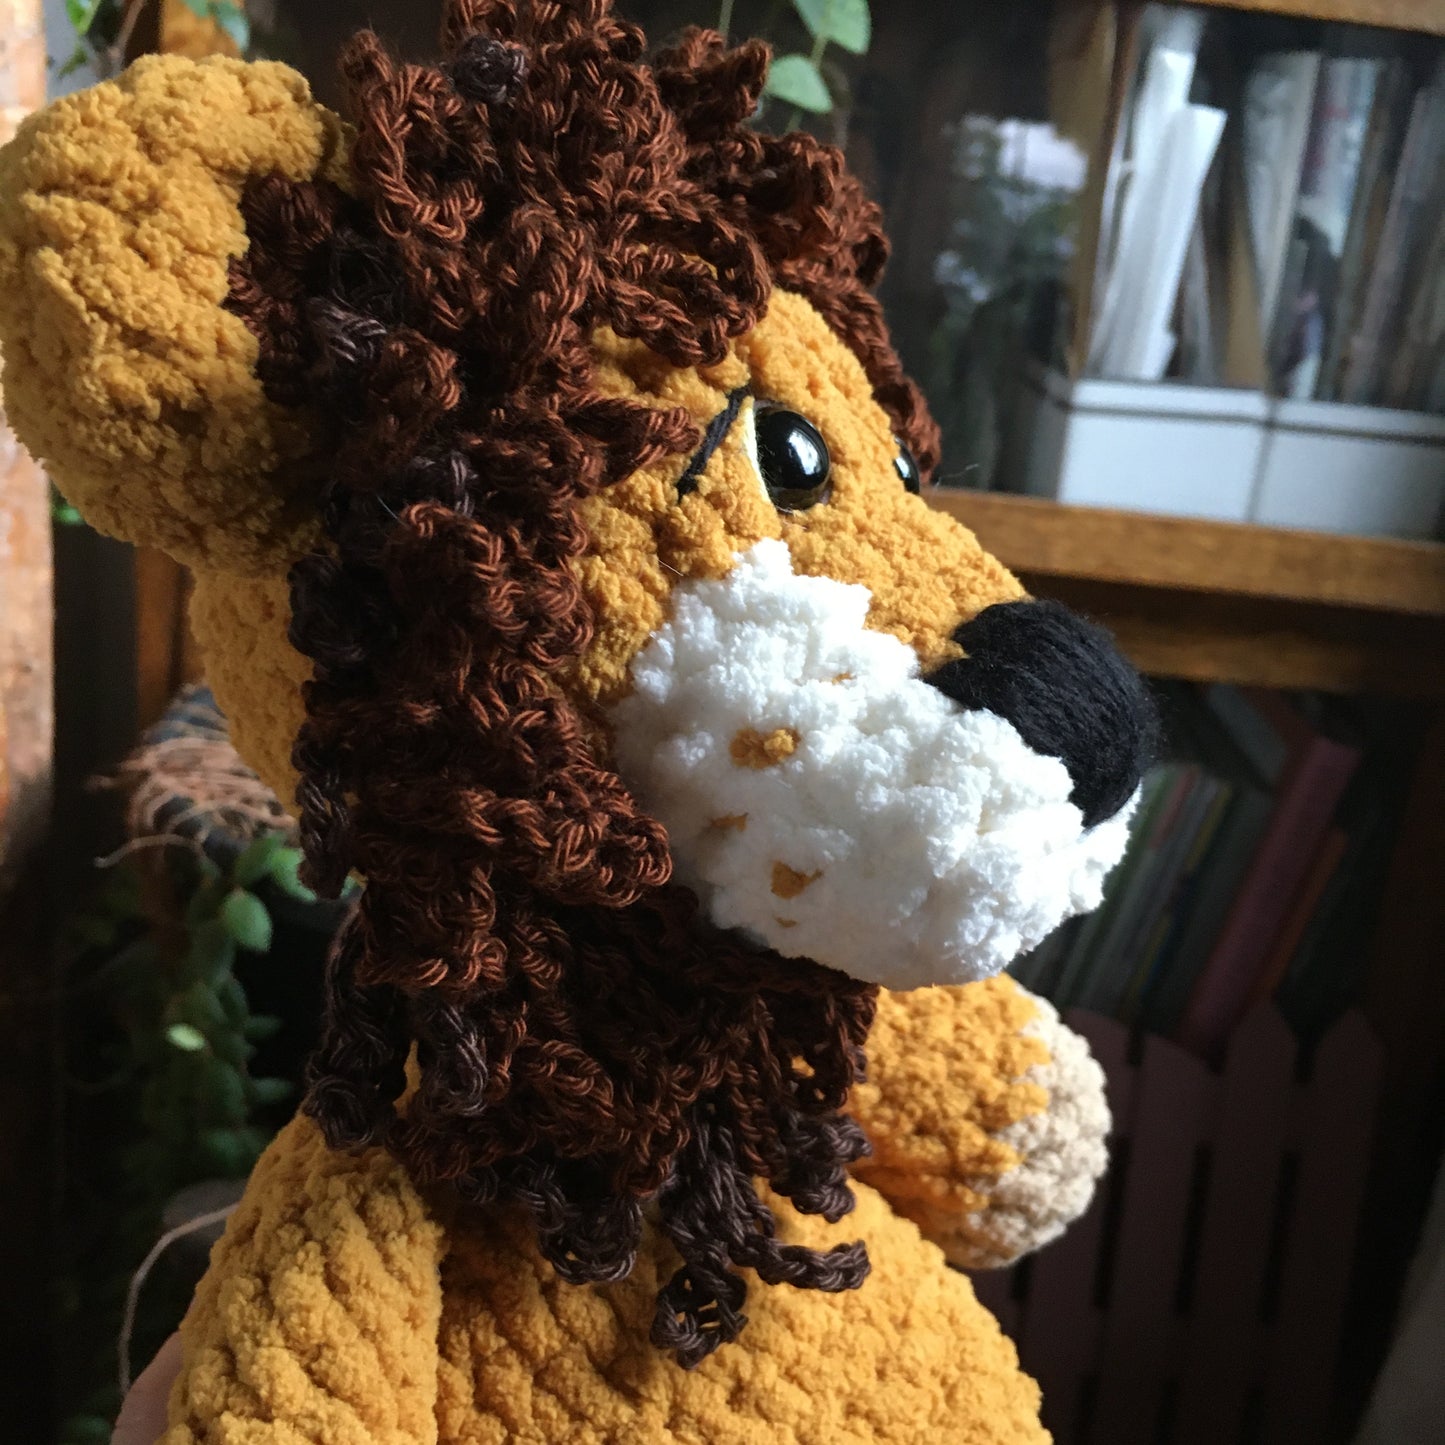 THE LION KING LEON - with Big belly, can be personalized in born plushies